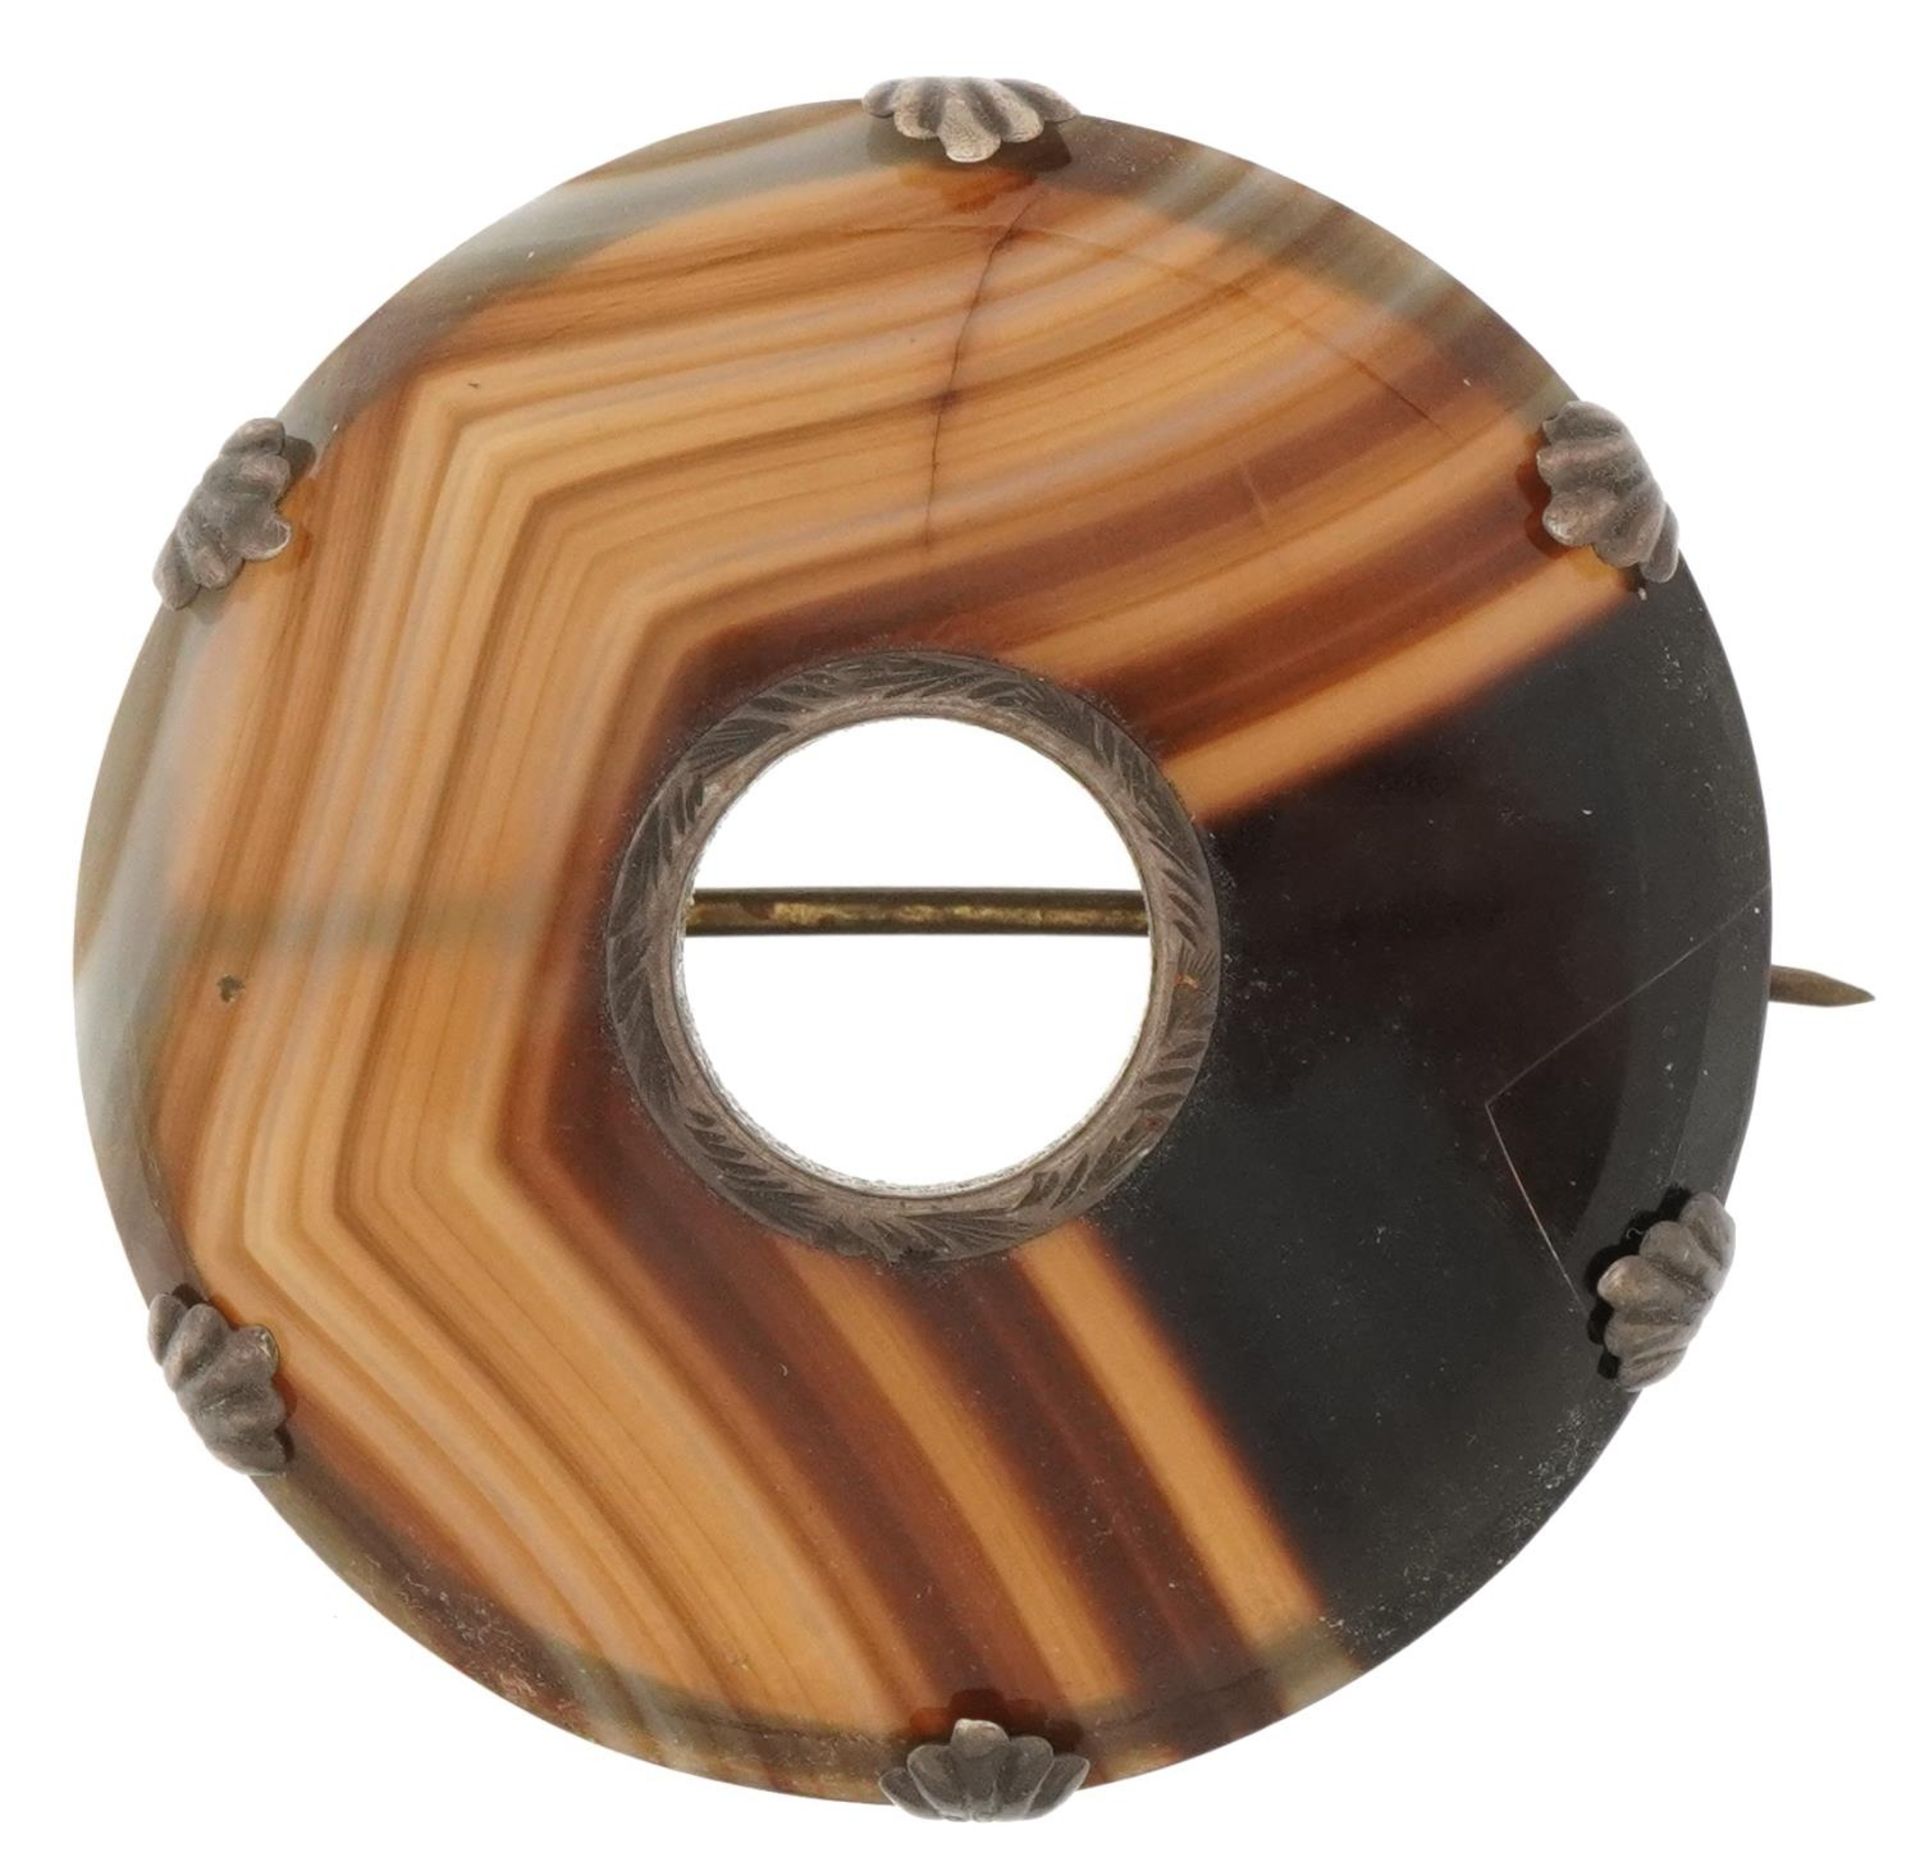 Scottish agate brooch with white metal mounts, 4.5cm in diameter, 16.5g : For further information on